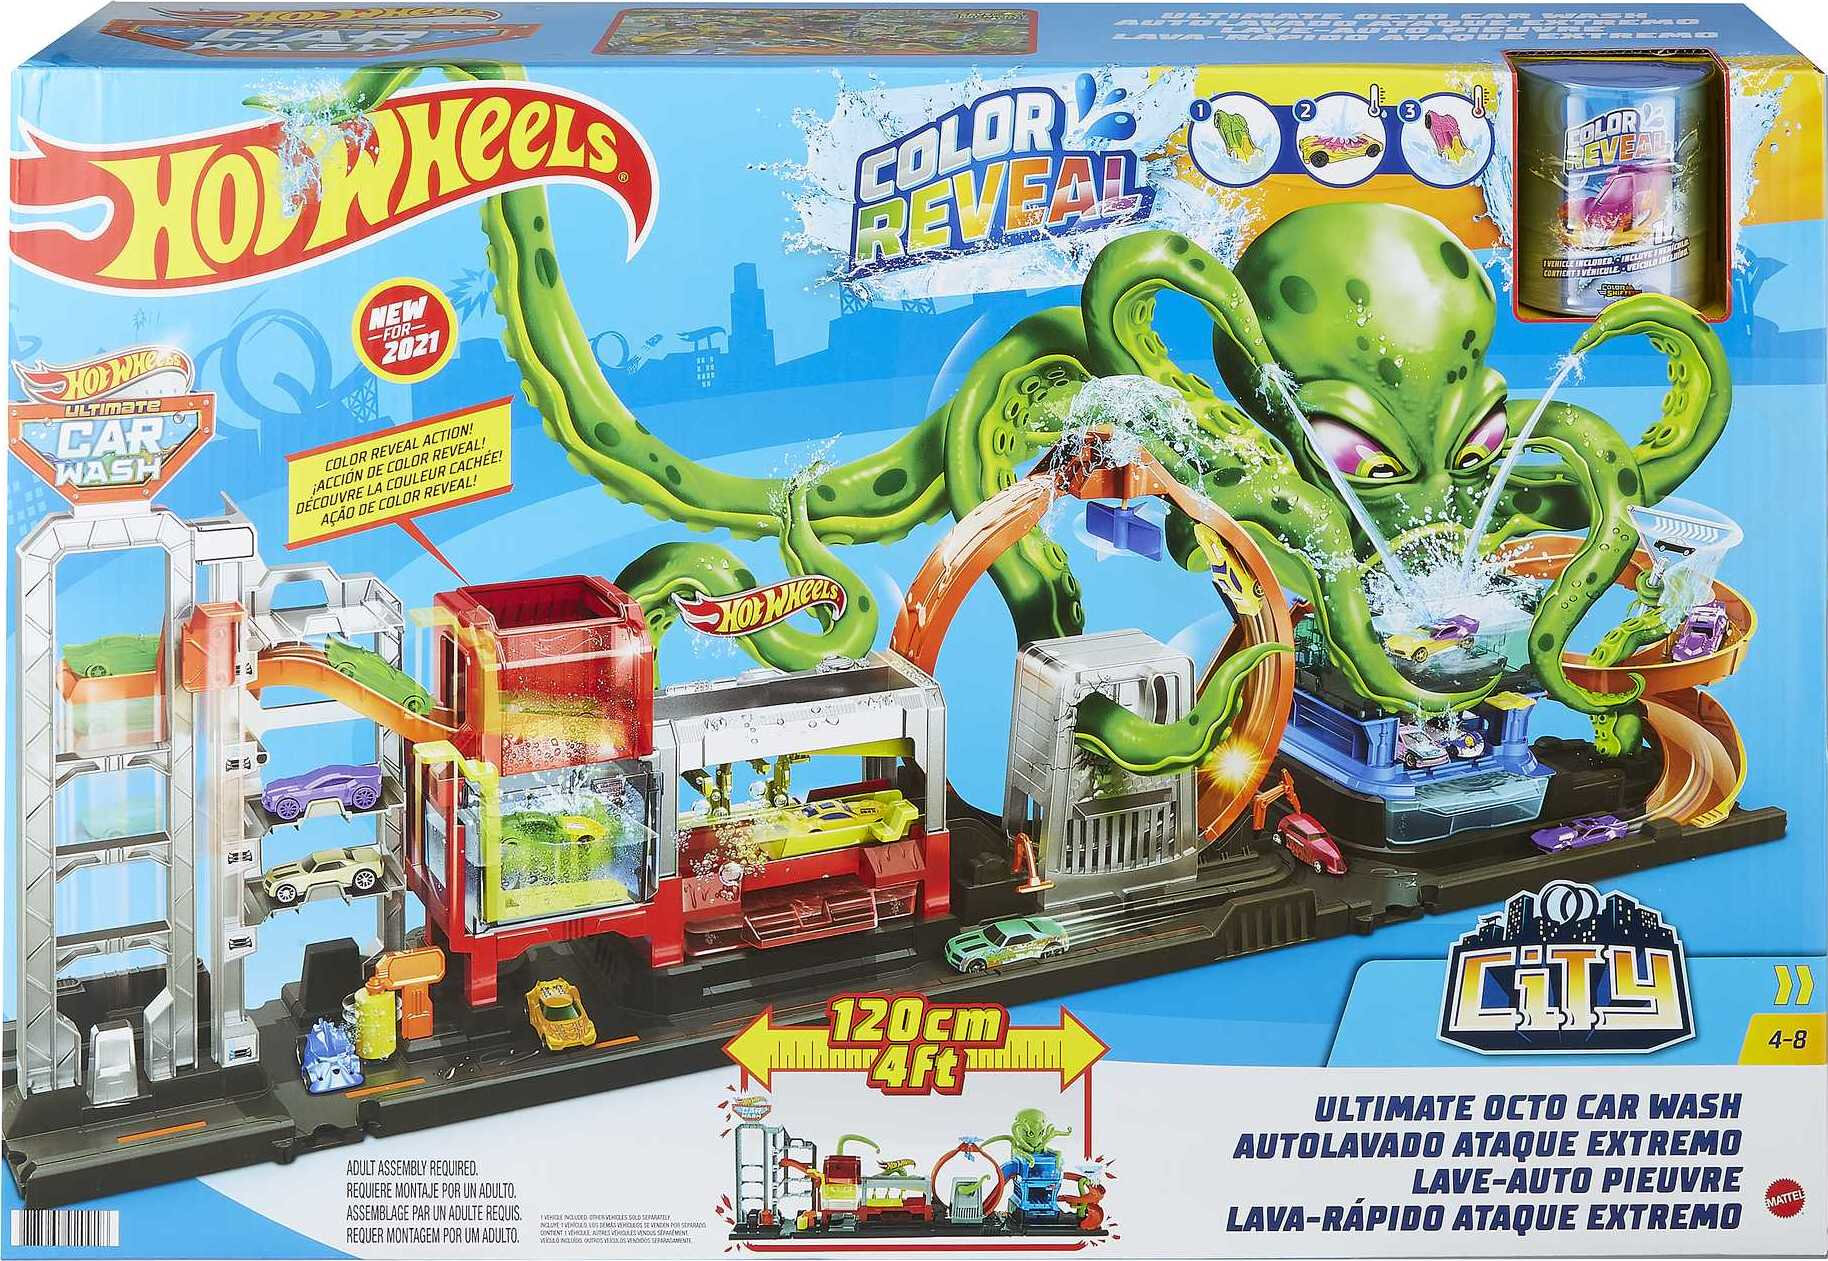 Hot Wheels City Ultimate Octo Car Wash Playset & 1 Color Reveal Toy Car in 1:64 Scale - image 7 of 7